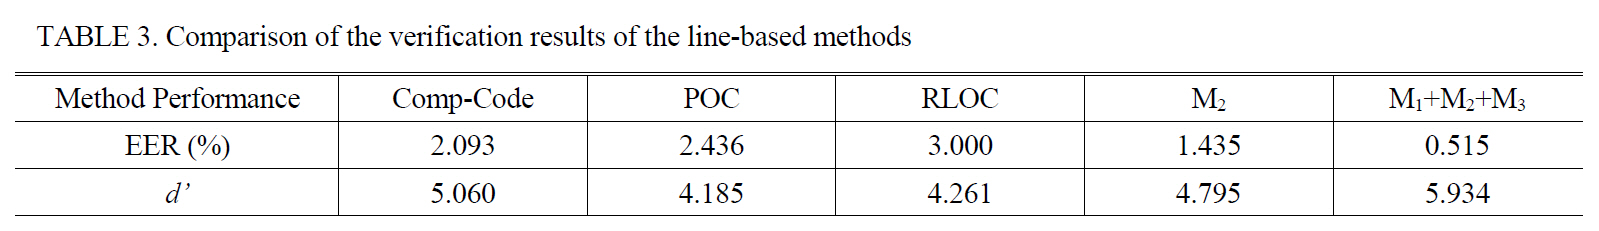 Comparison of the verification results of the line-based methods